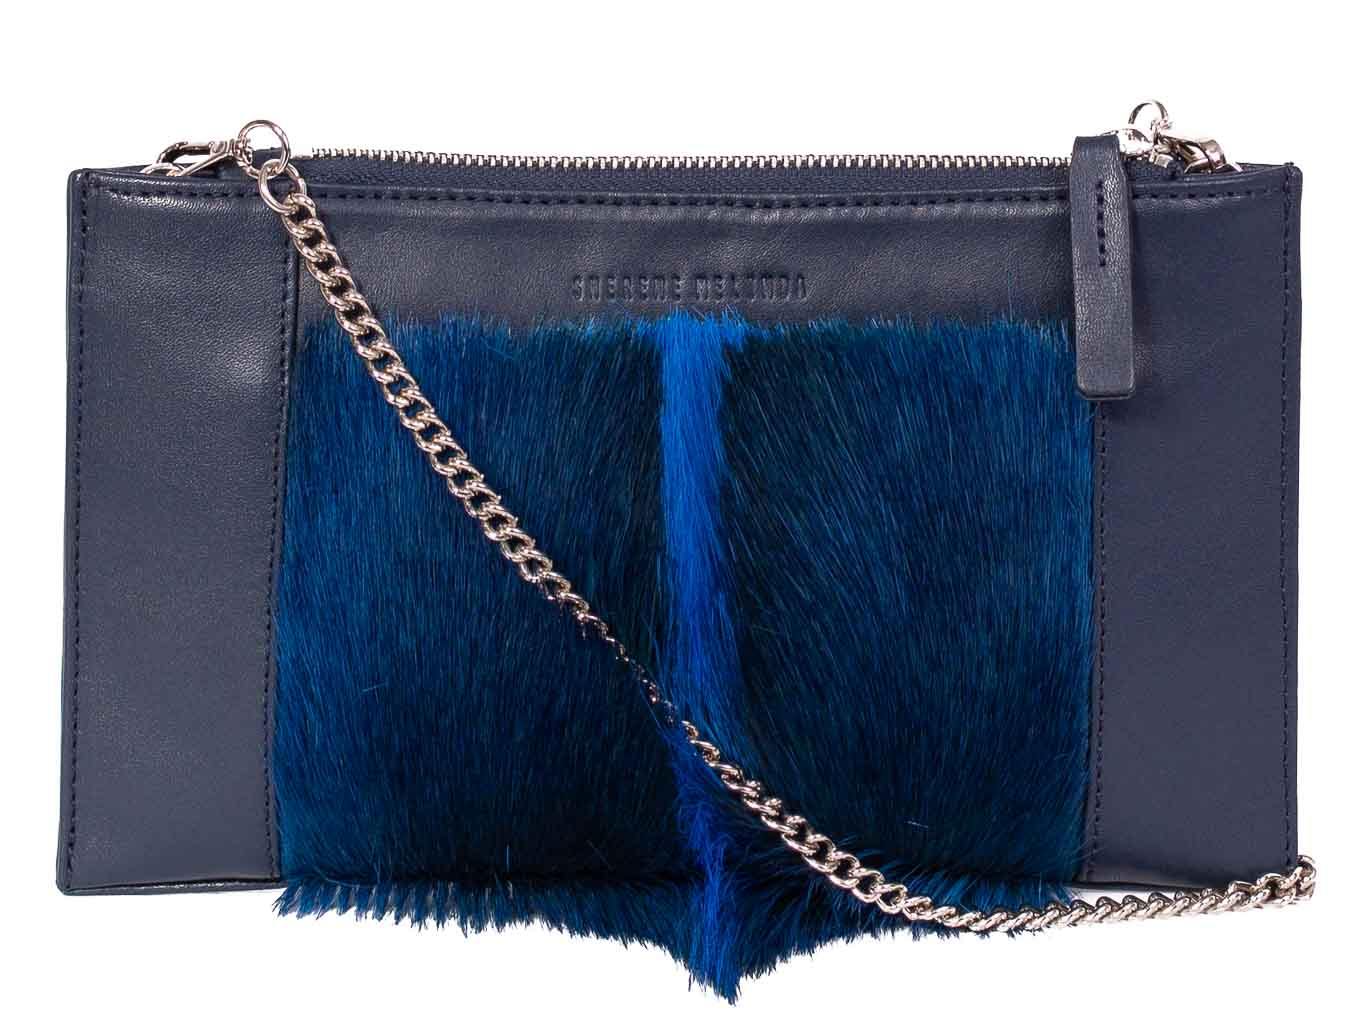 Clutch Springbok Handbag in Navy Blue with a fan feature by Sherene Melinda front strap